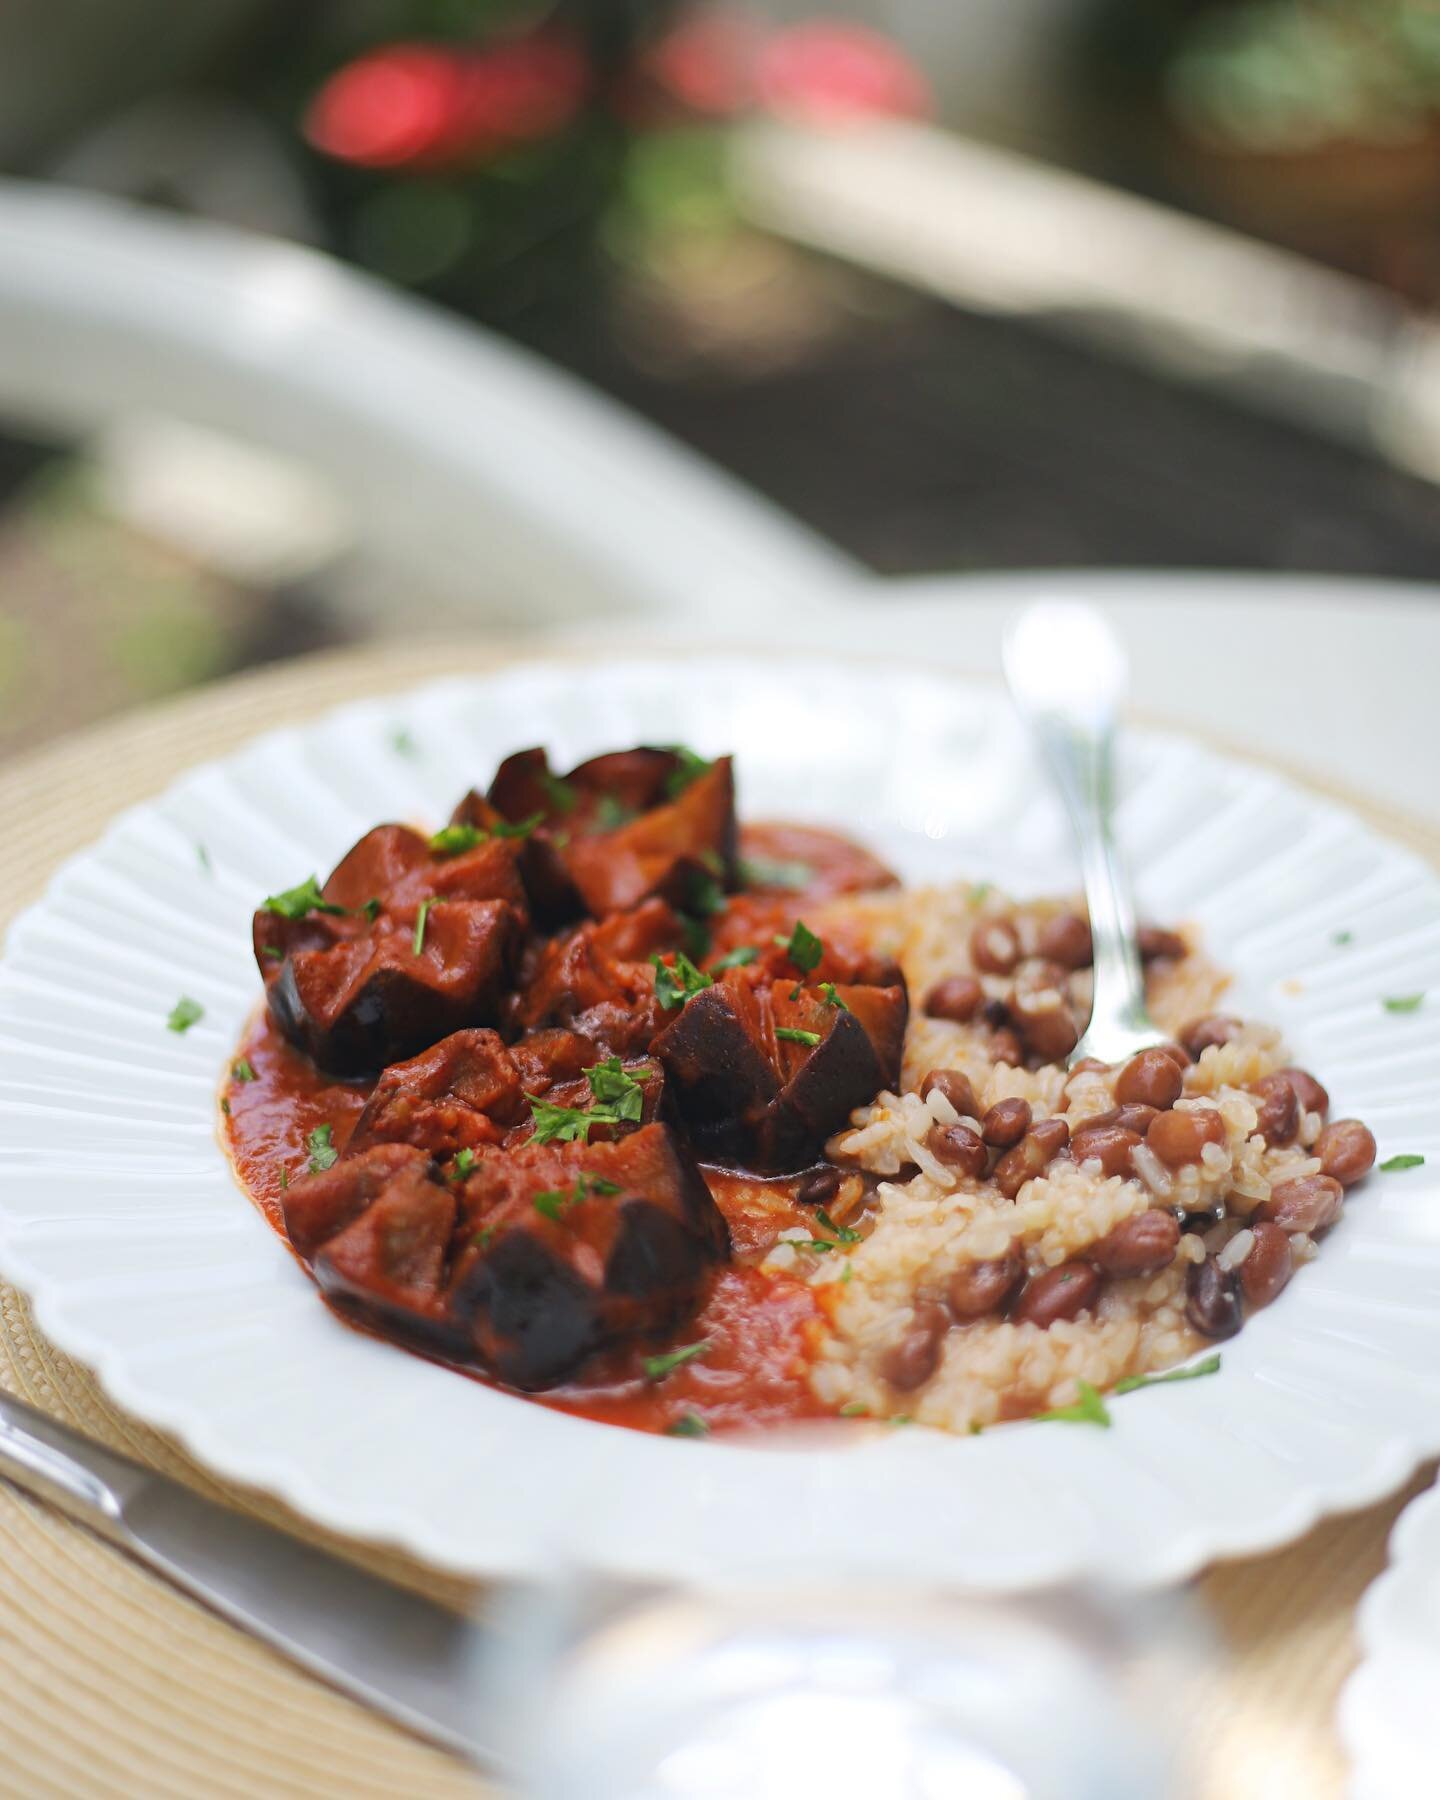 For anyone with top-notch memory, you might recall I posted a photo of some aubergine slices cooked in a tomato sauce with some rice and beans recently. I&rsquo;ve written up the recipe and have posted it to my blog, the link to which is in my bio!

